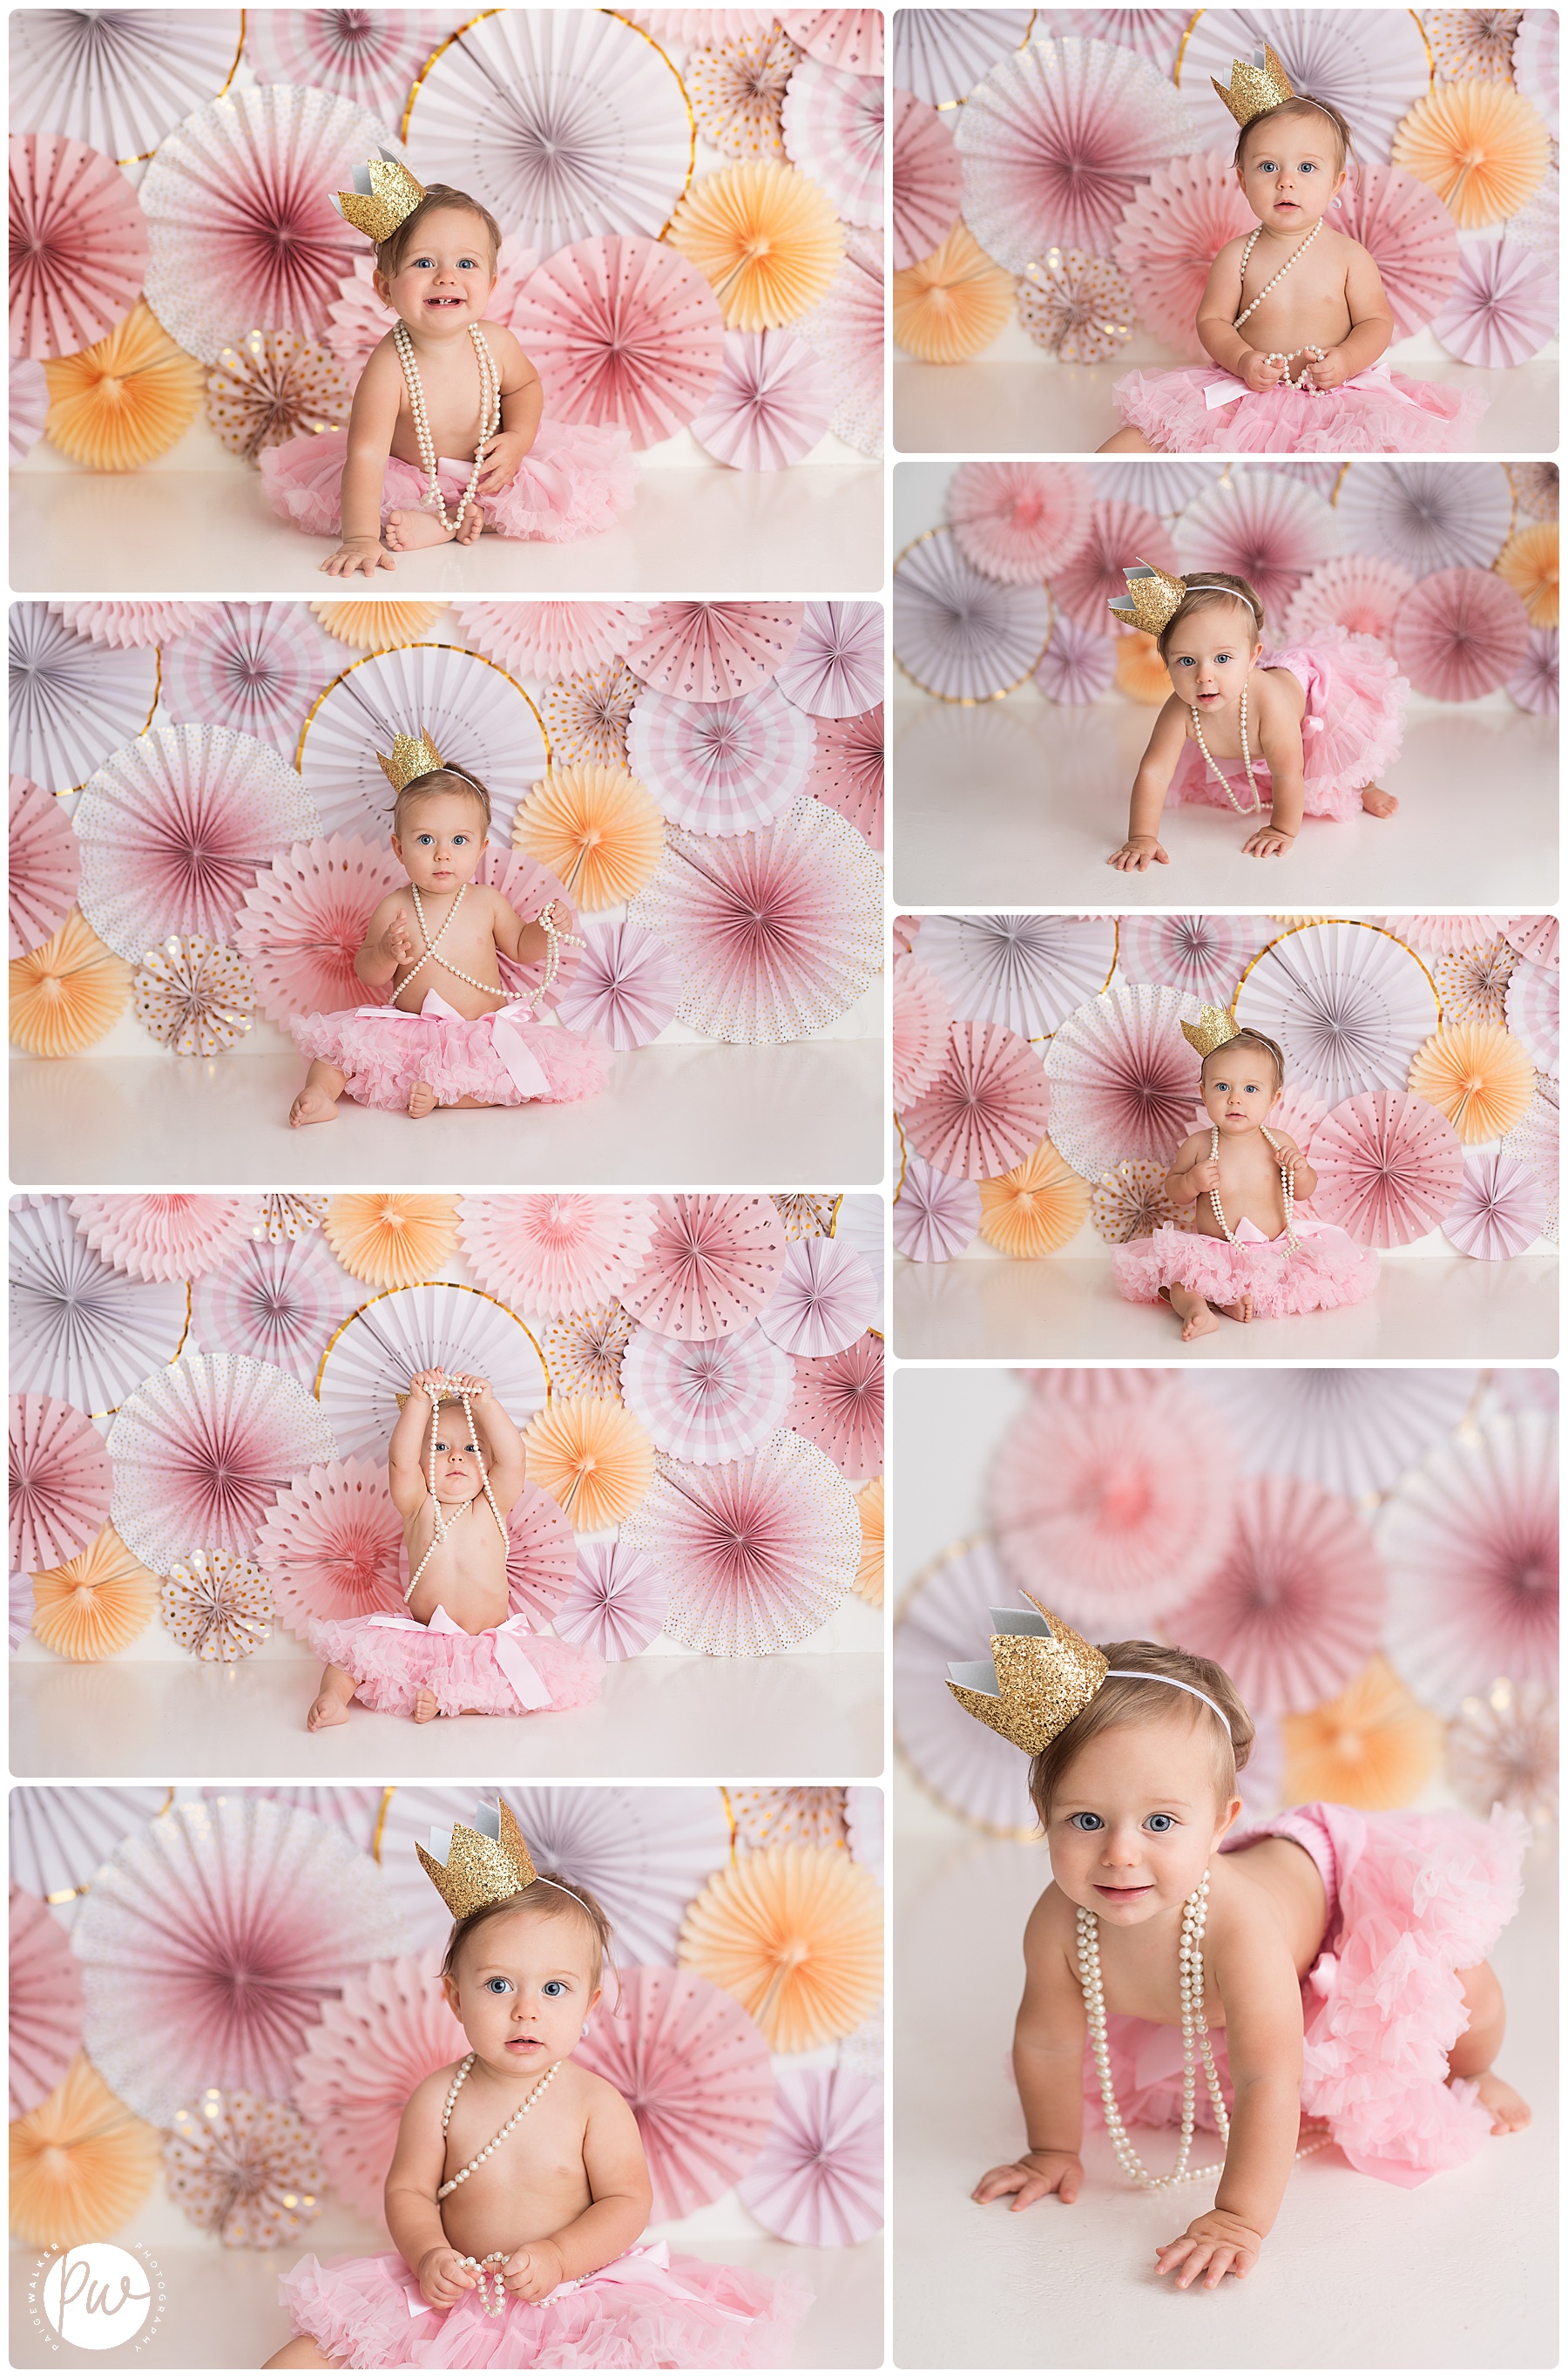 studio session for a one year old birthday girl